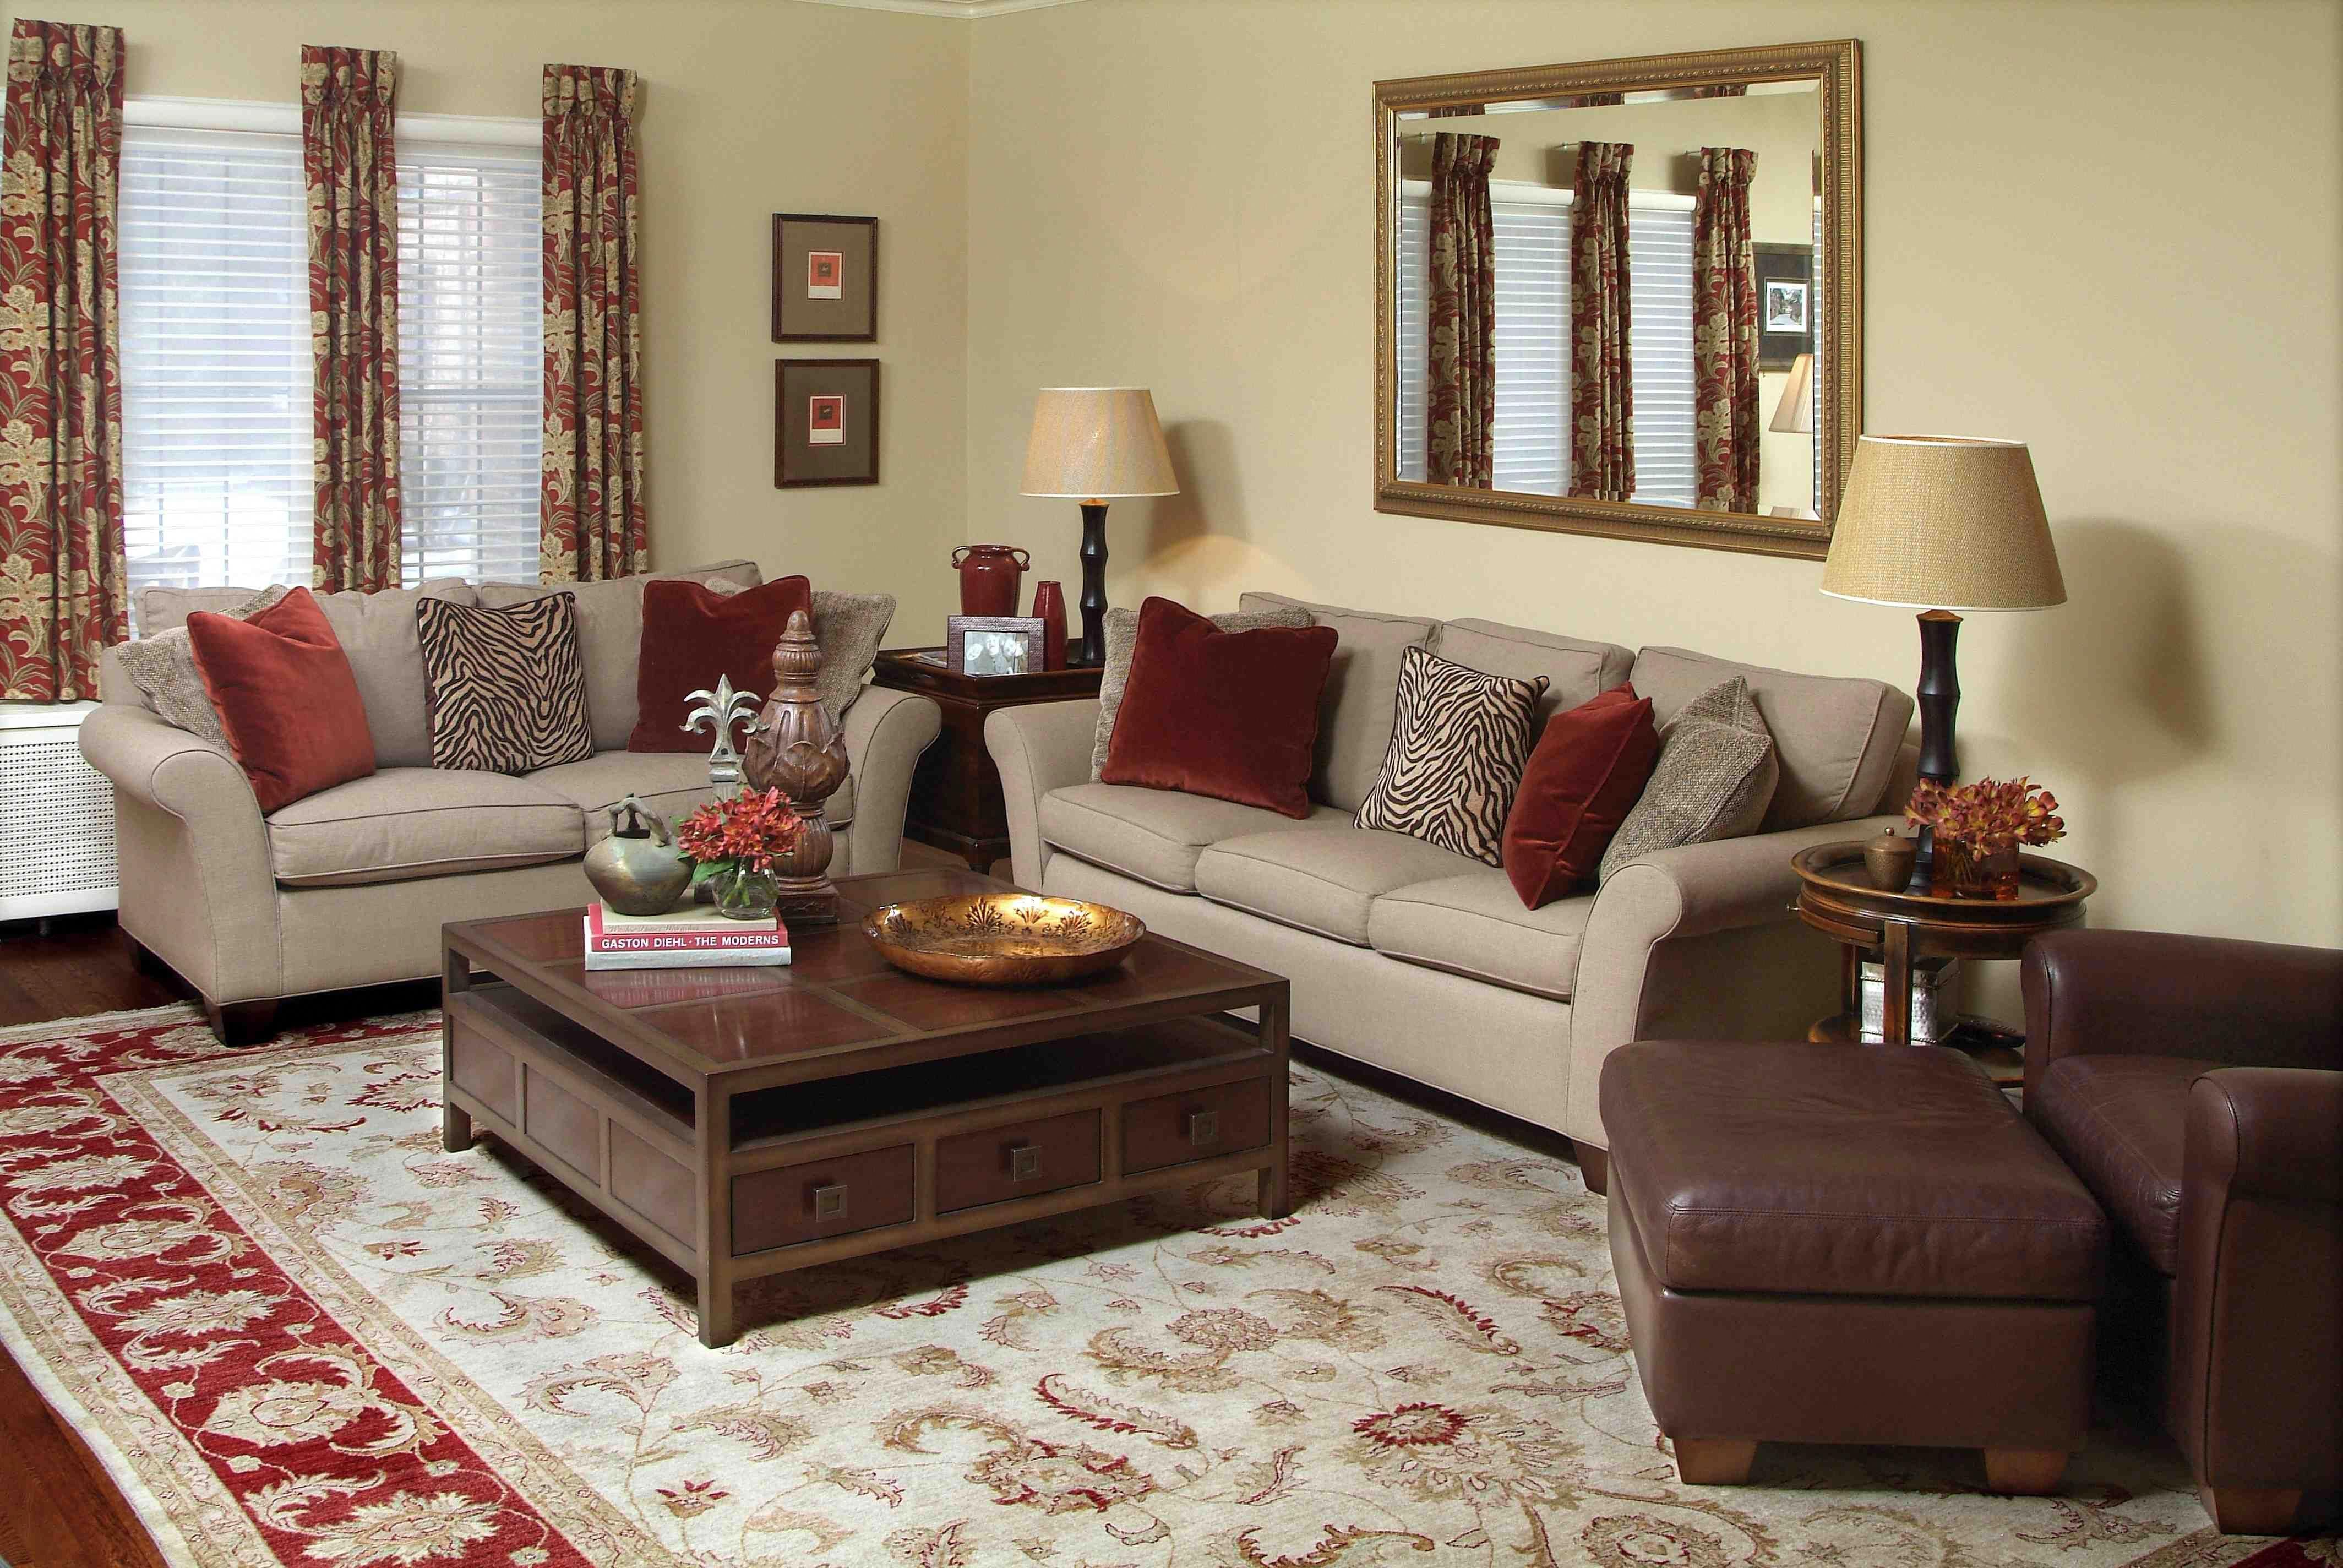 Beautiful Living Rooms Interiors: Create A Comfortable And Inviting Home Space